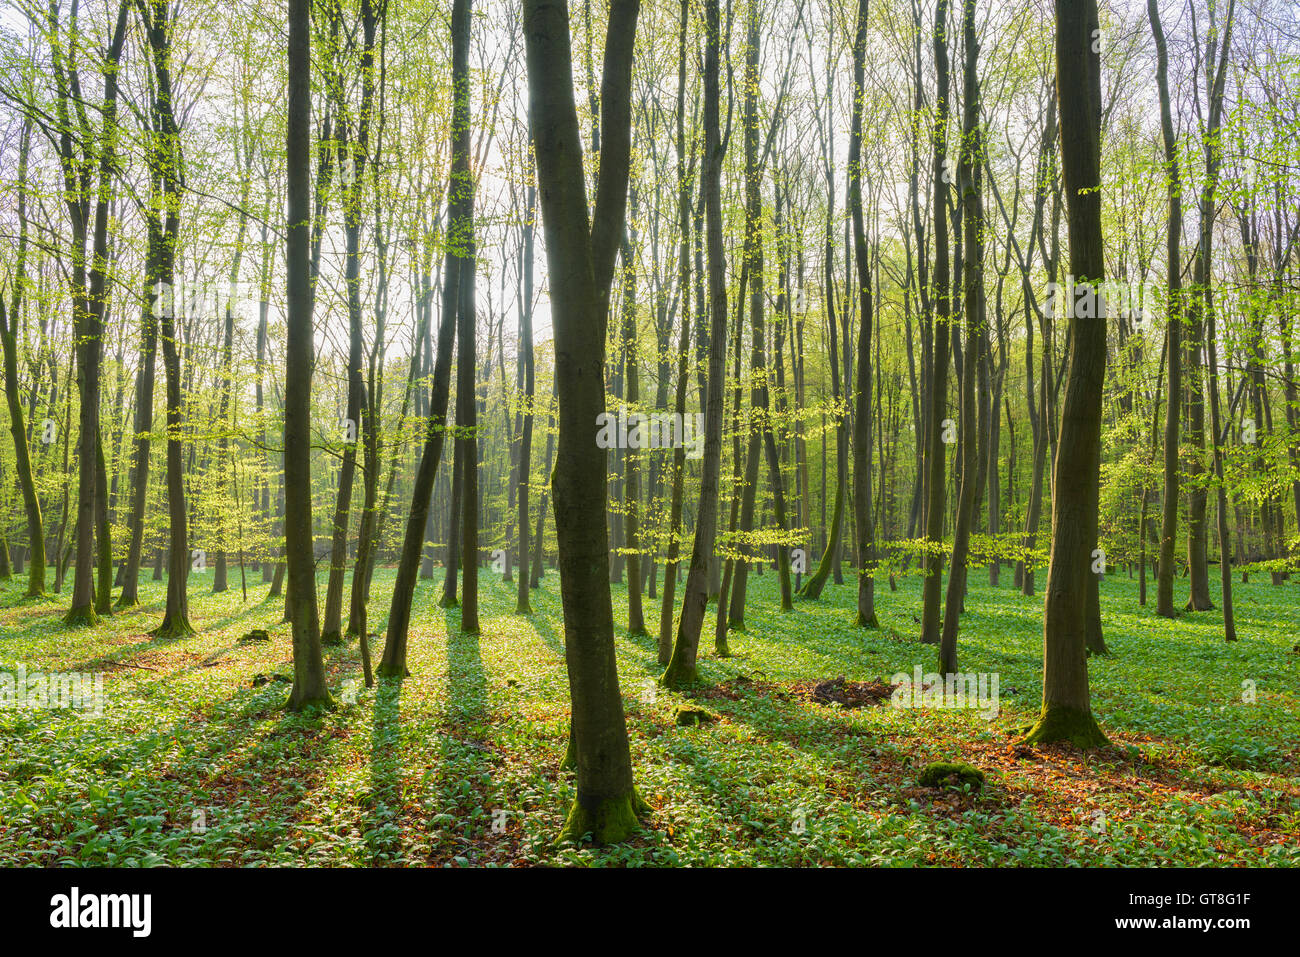 European Beech (Fagus sylvatica) Forest in Spring, Hesse, Germany Stock Photo